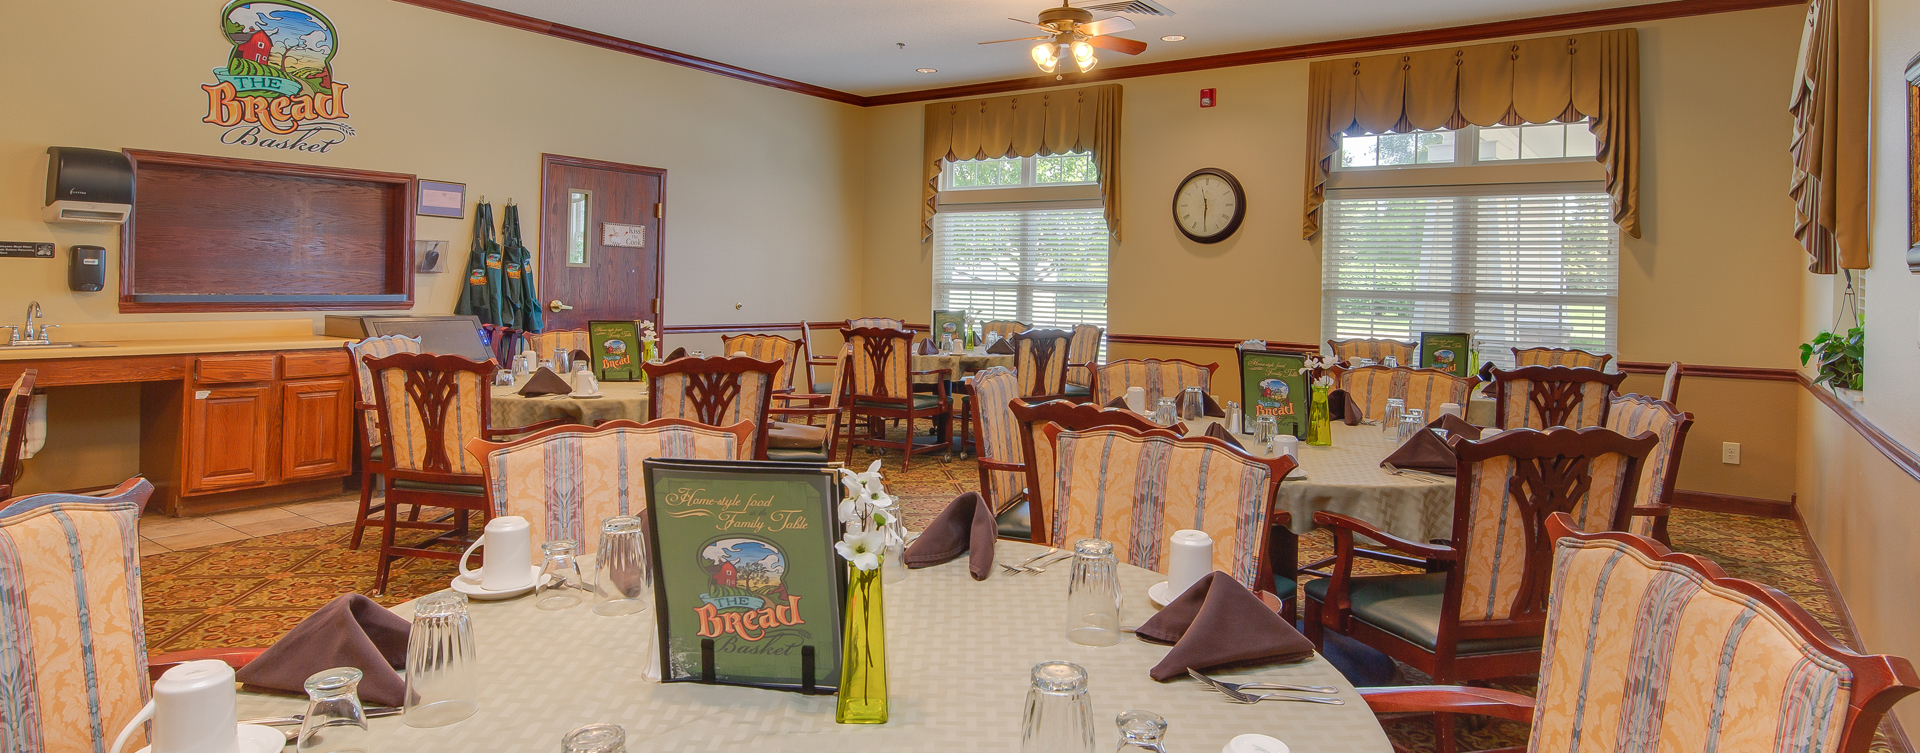 Food is best when shared with friends in the dining room at Bickford of Portage